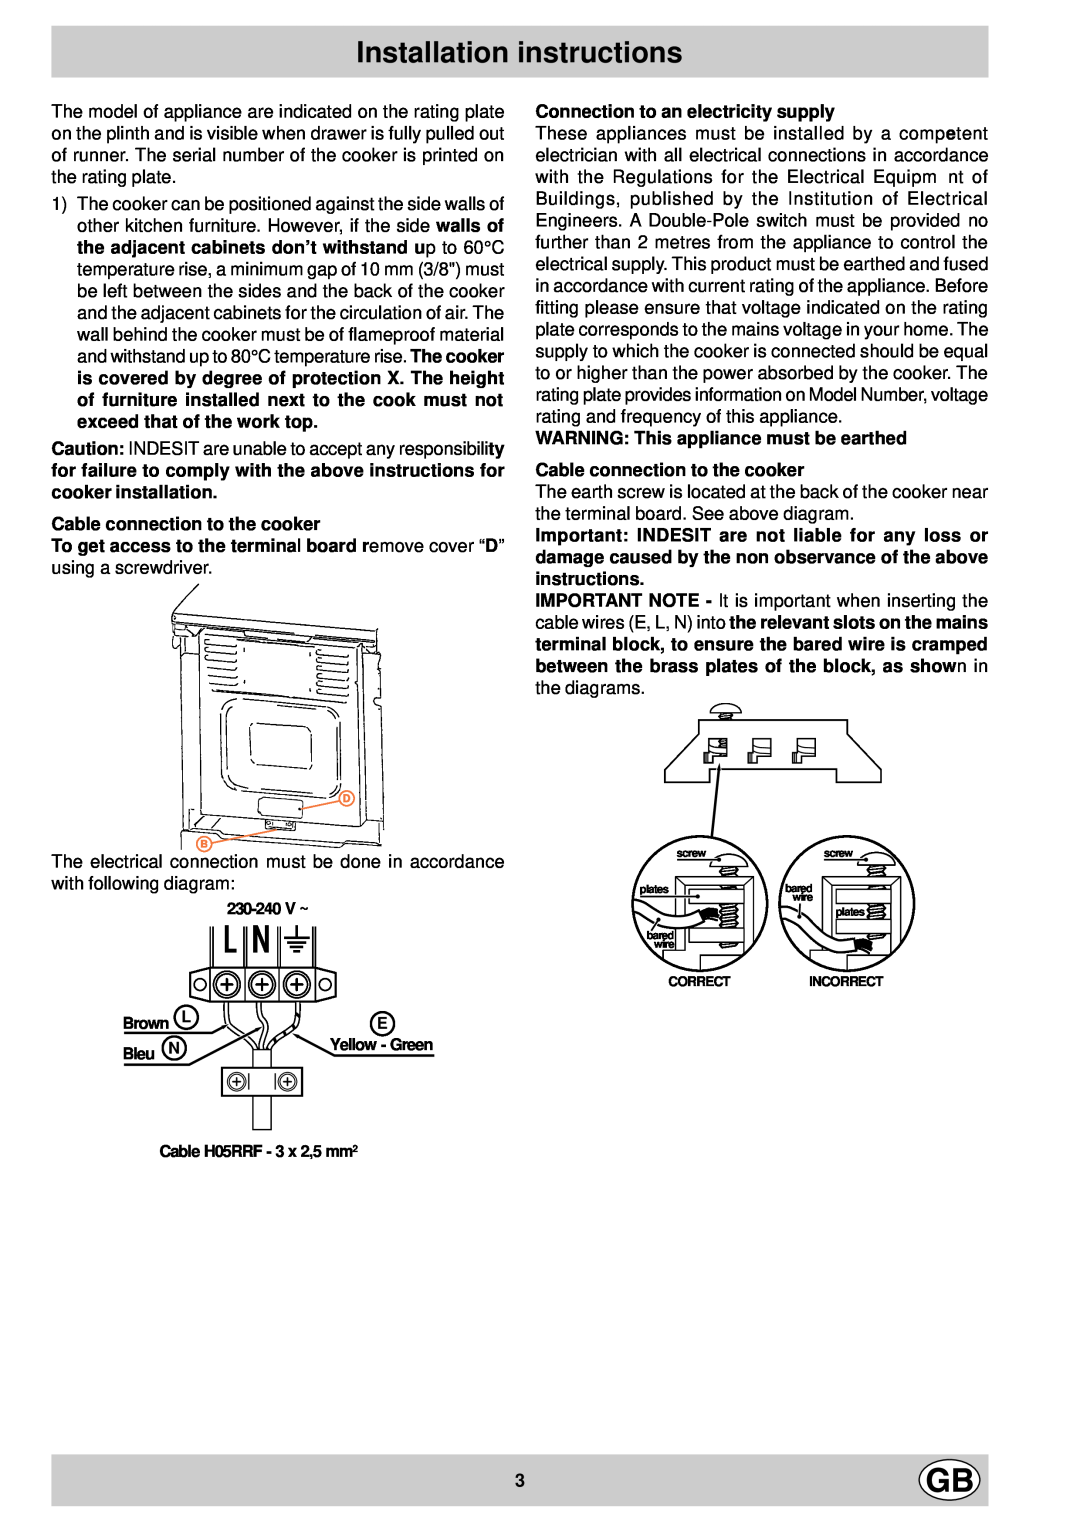 Indesit KG6044WV/G manual Installation instructions, Cable connection to the cooker, Connection to an electricity supply 